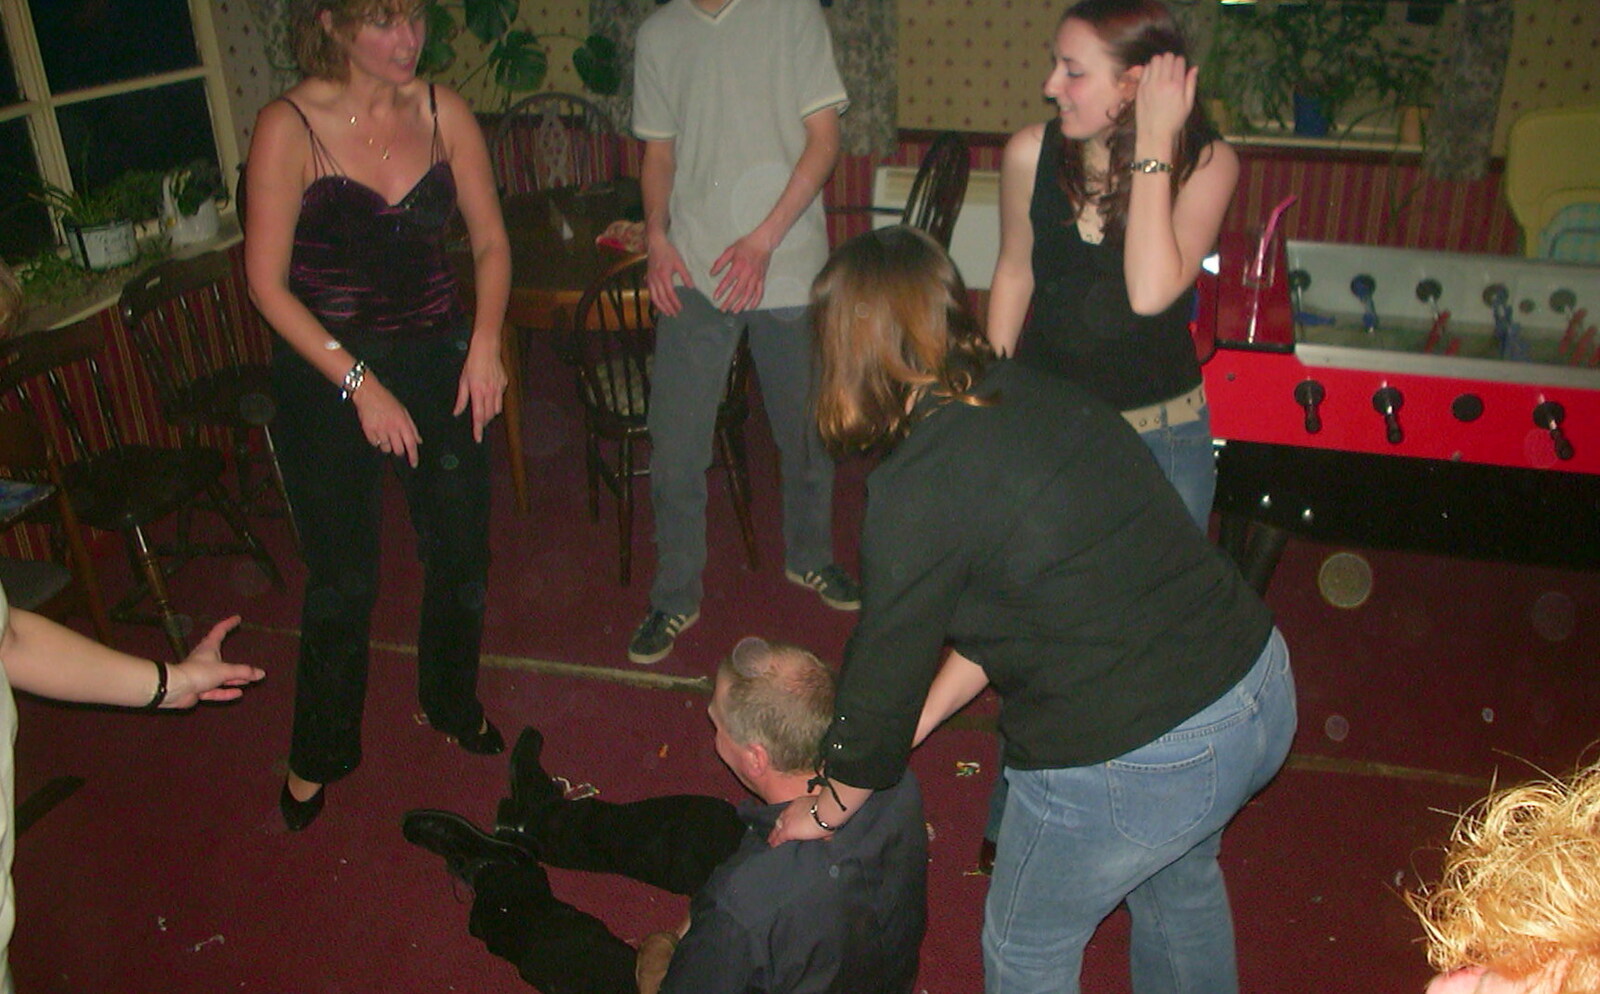 New Year's Eve at the Swan Inn, Brome, Suffolk - 31st December 2002: John Willy's on the floor again